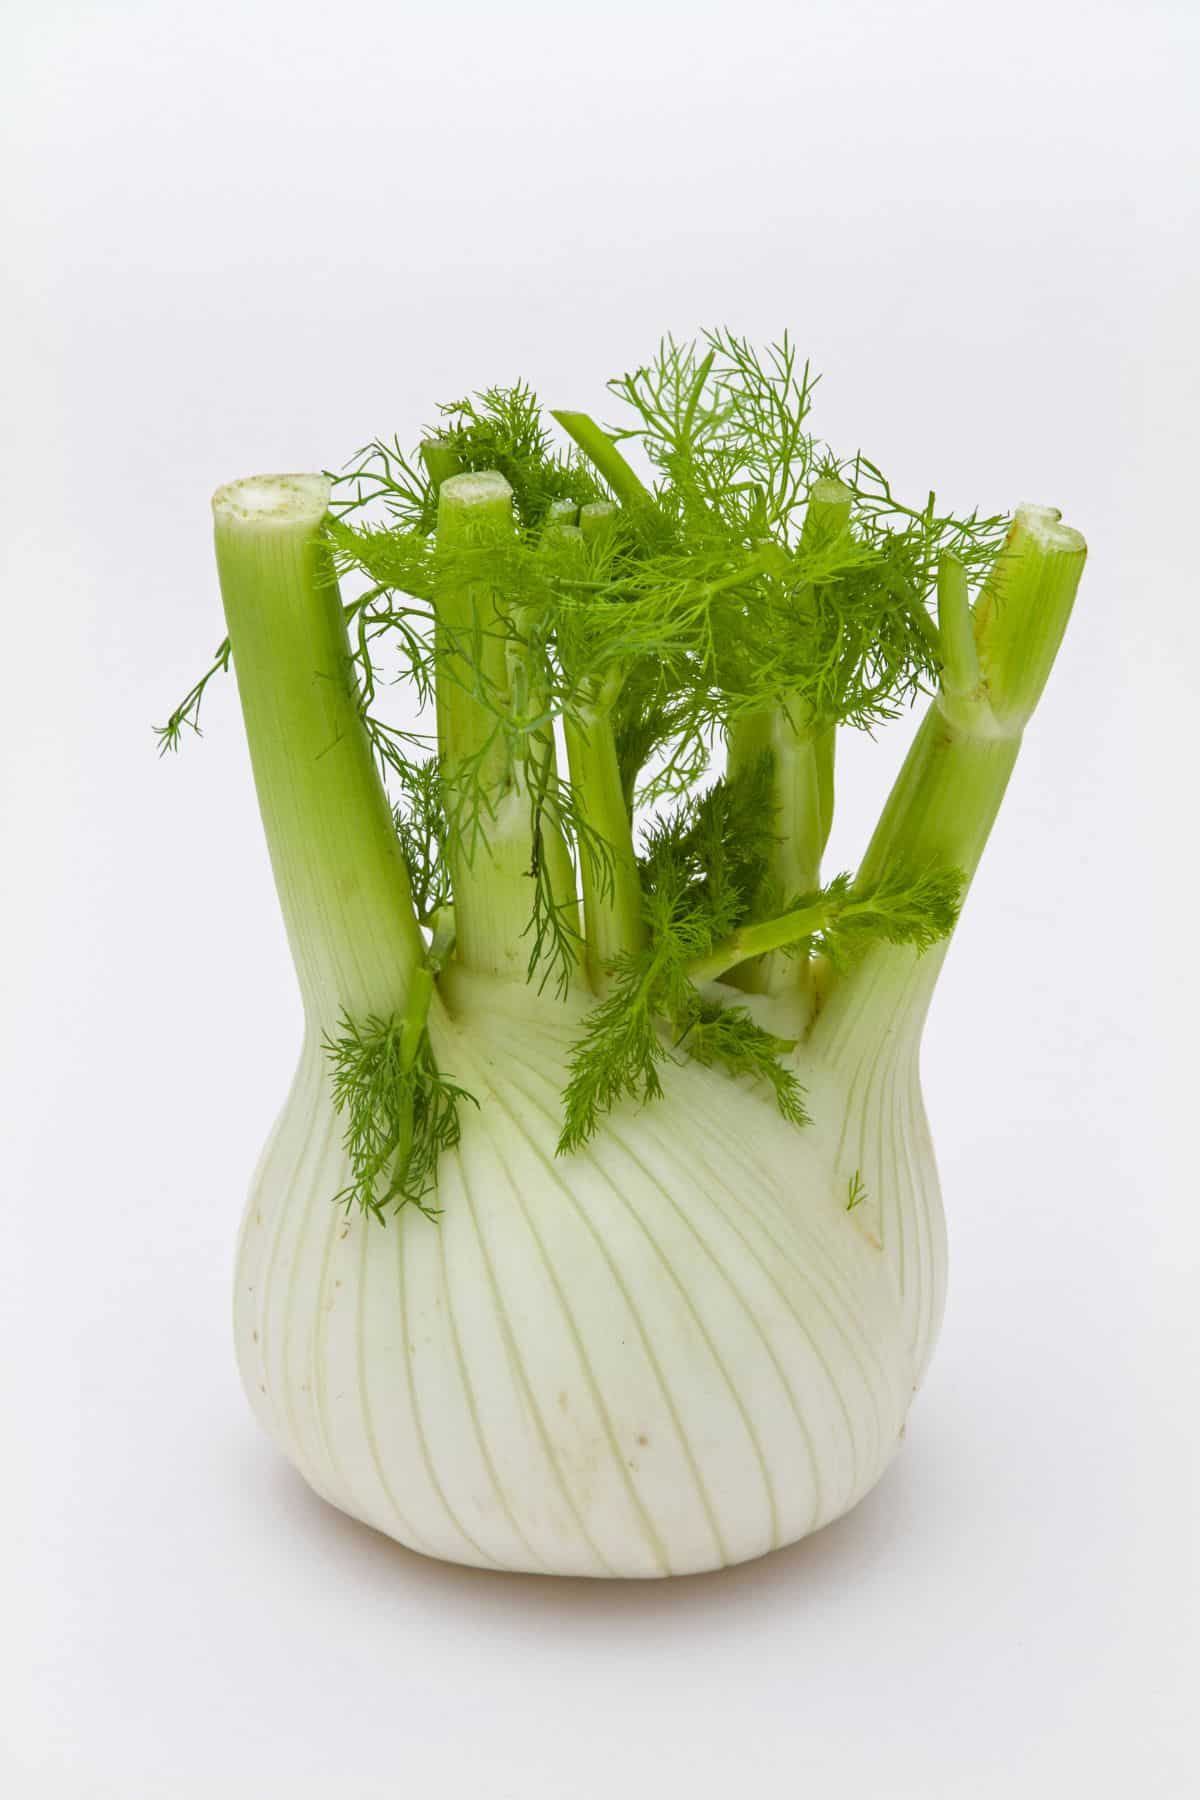 photo of fennel on table.